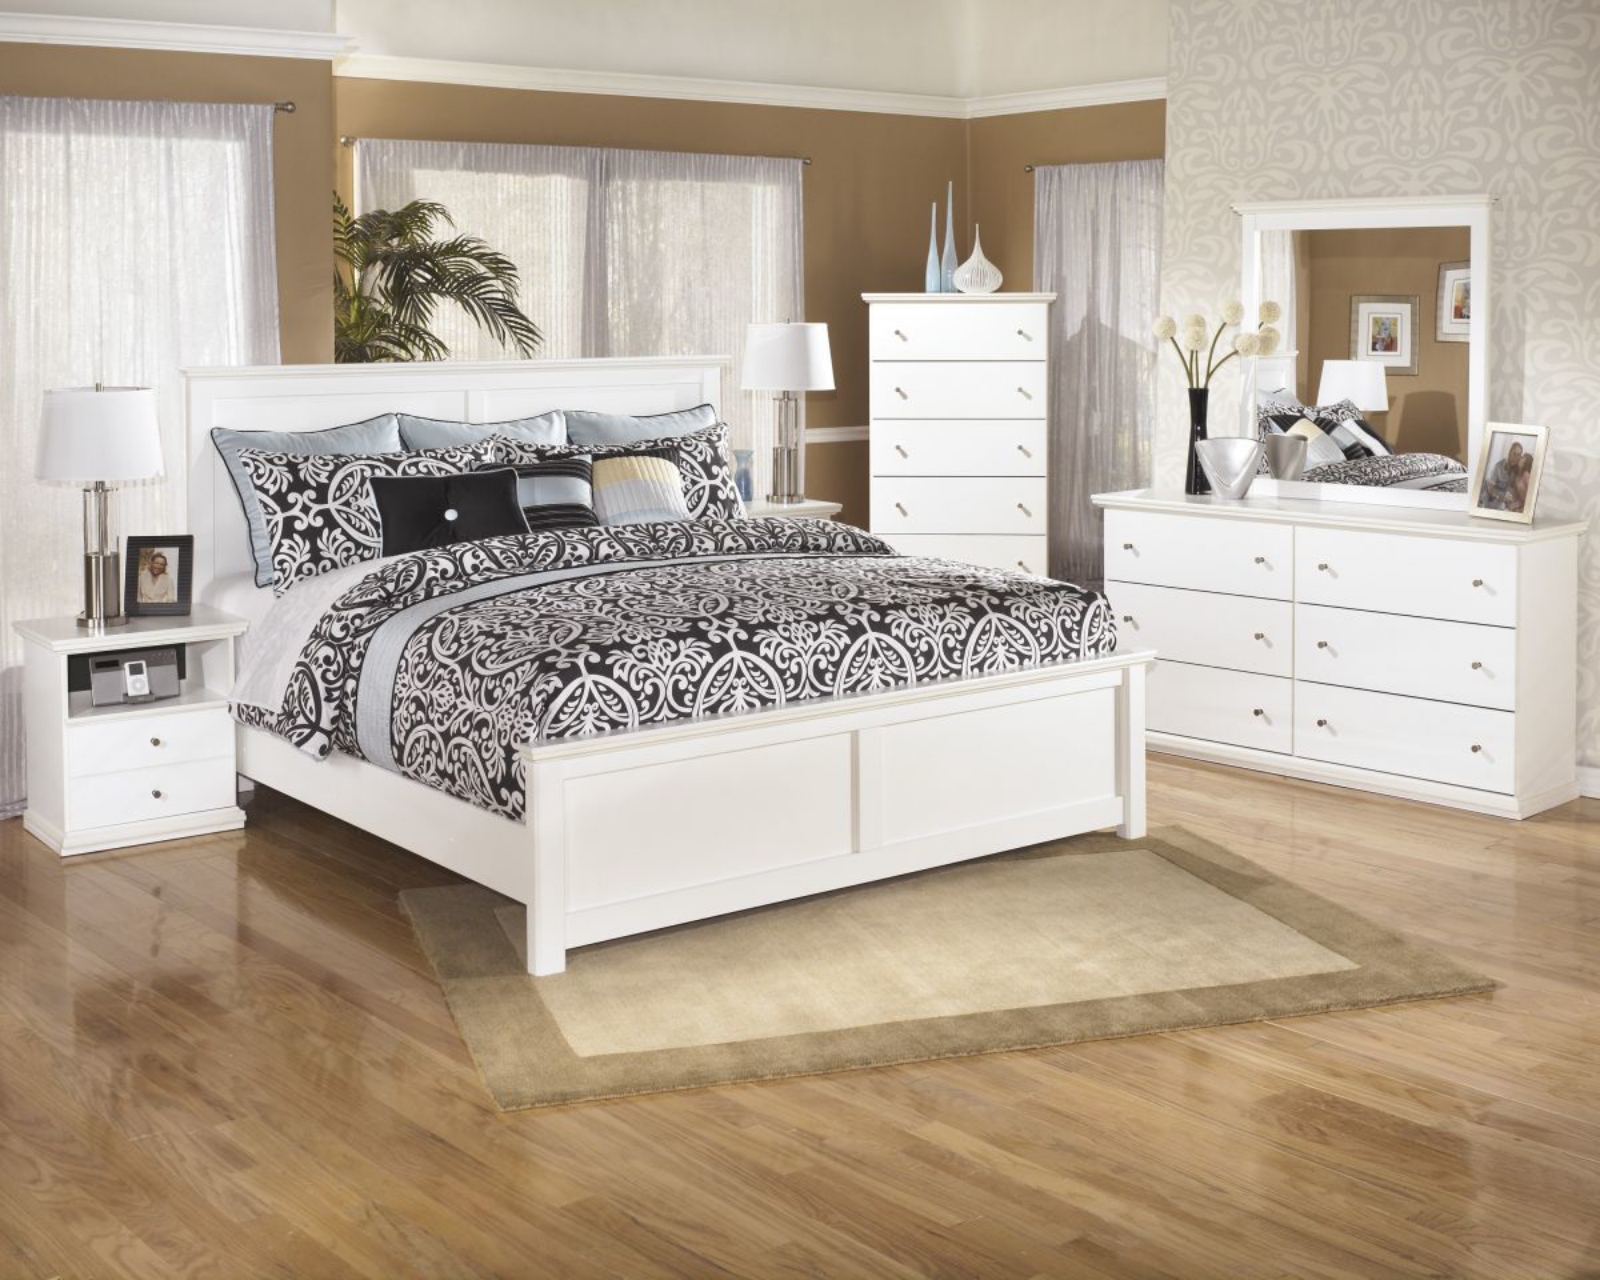 Picture of Bostwick Shoals 5 Piece King Bedroom Group